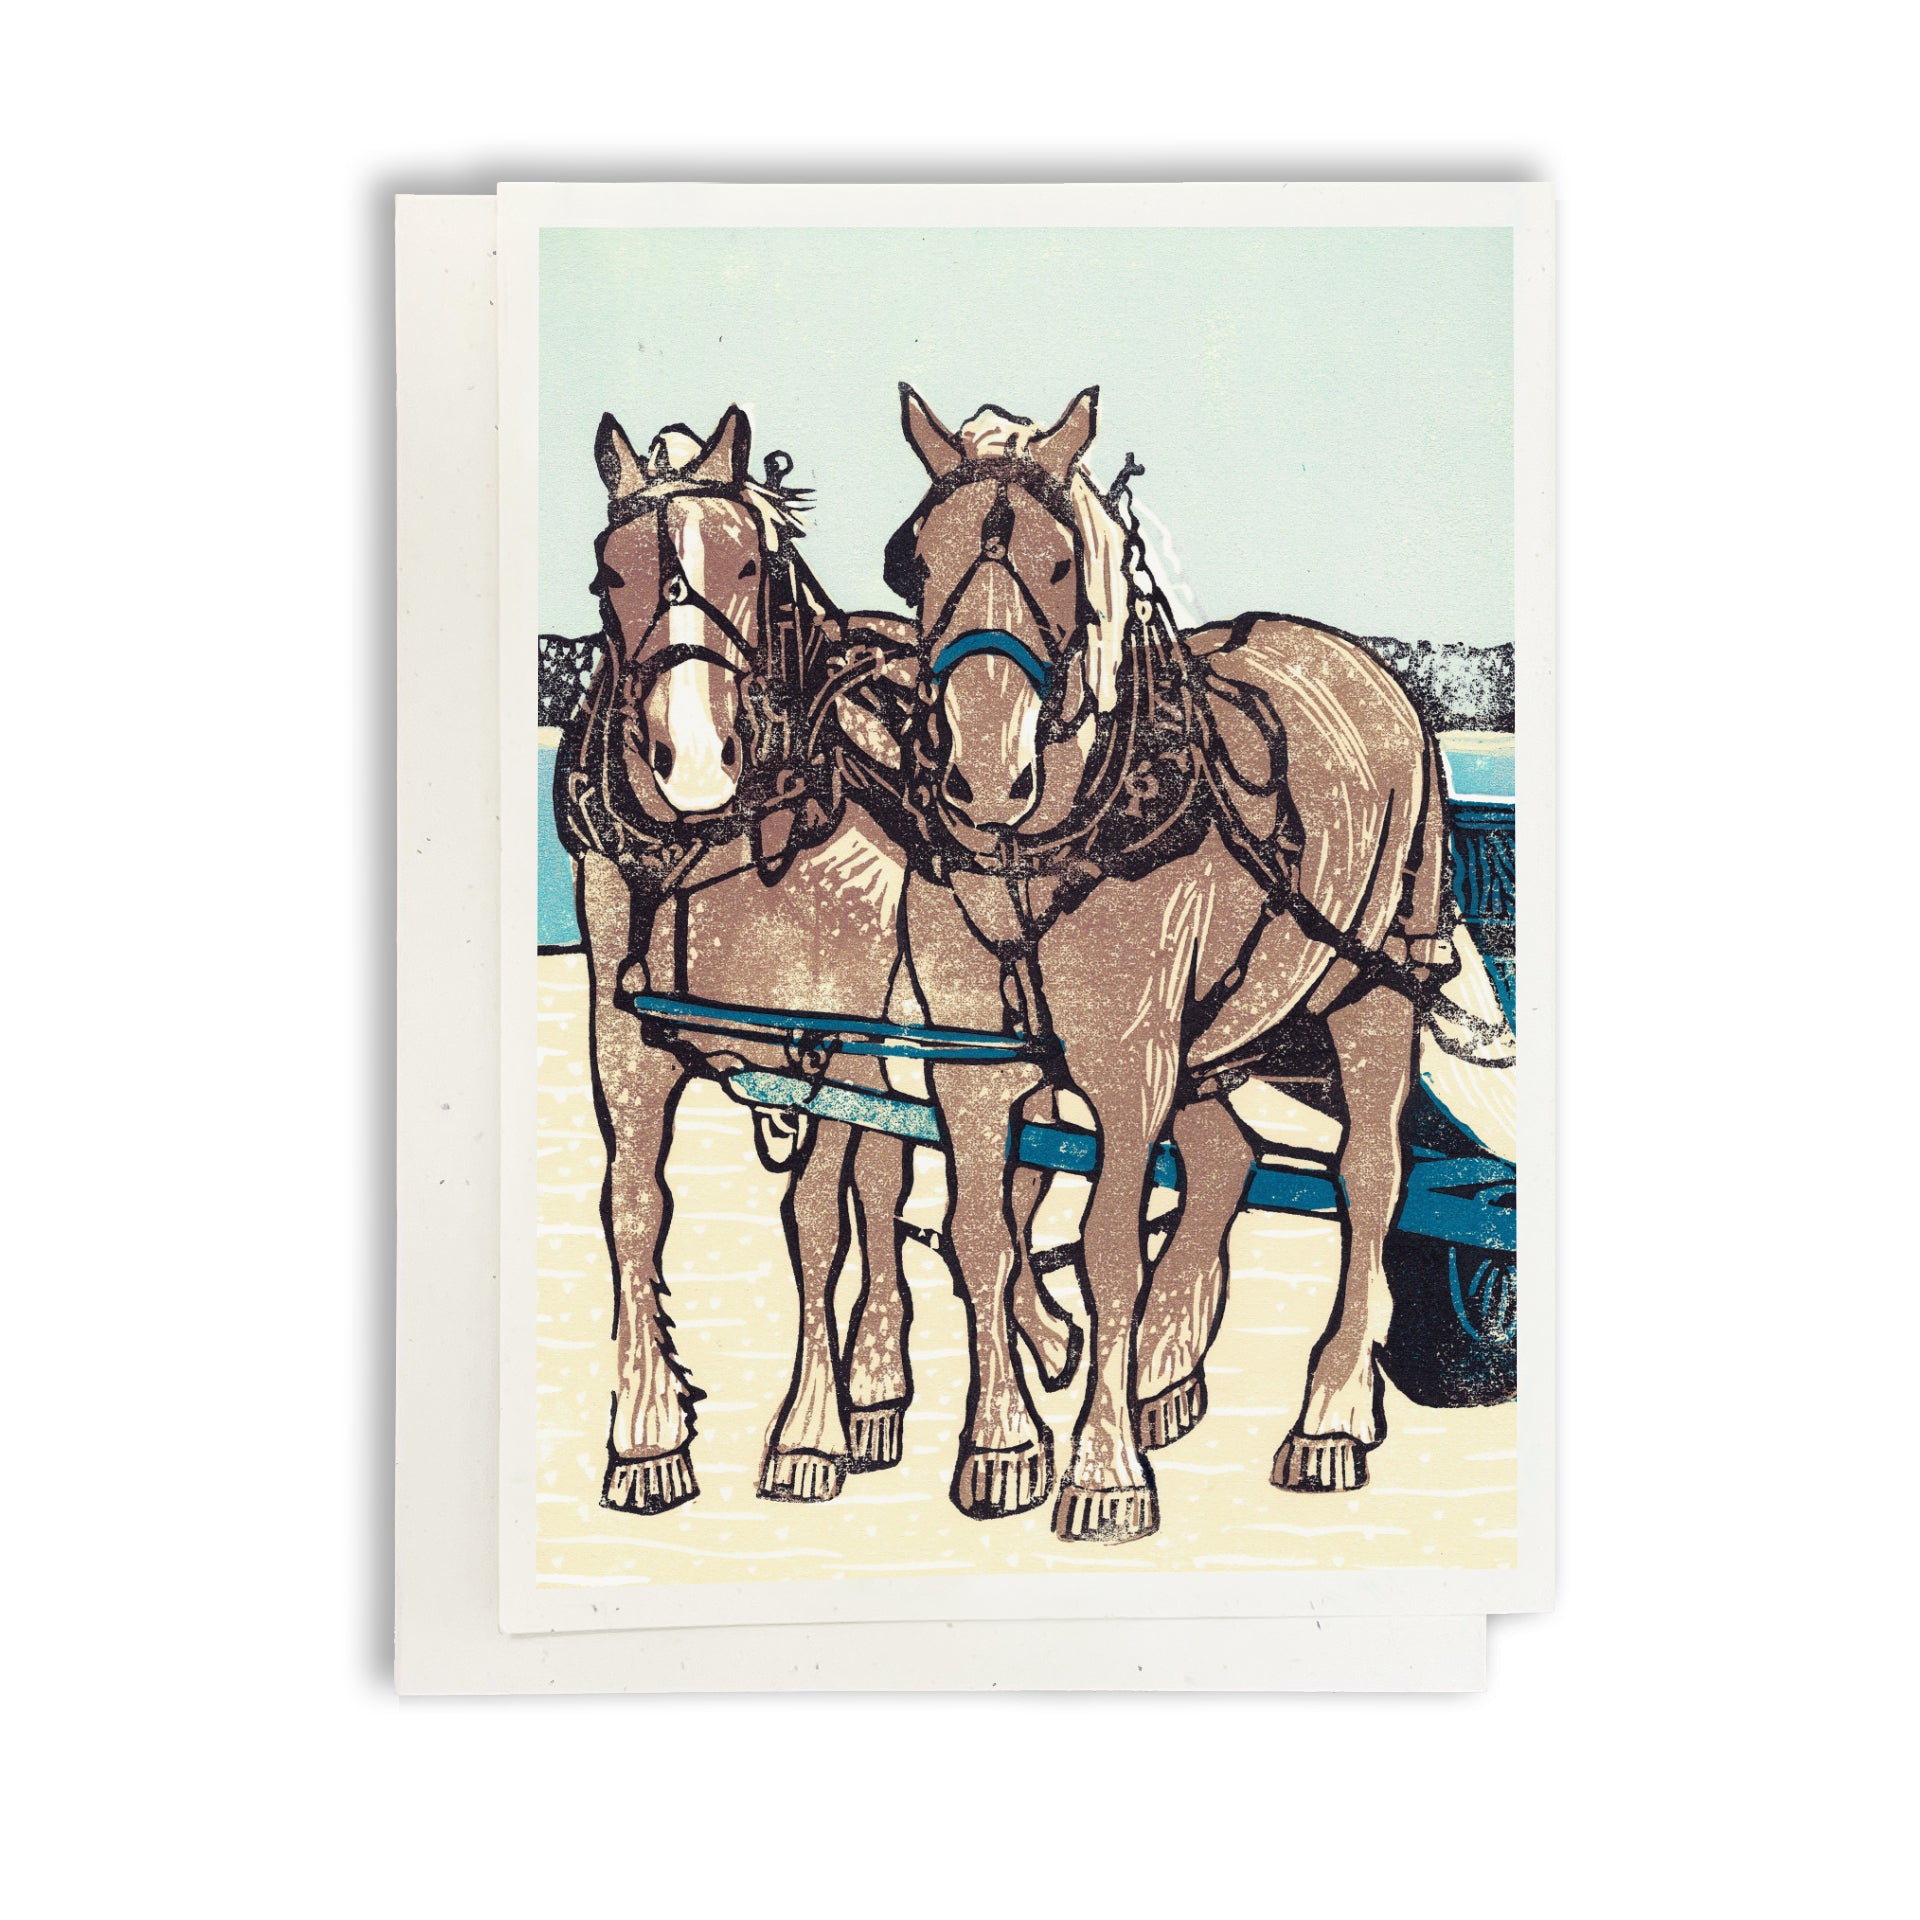 Dray Team on the Dock greeting card by Natalia Wohletz of Peninsula Prints.